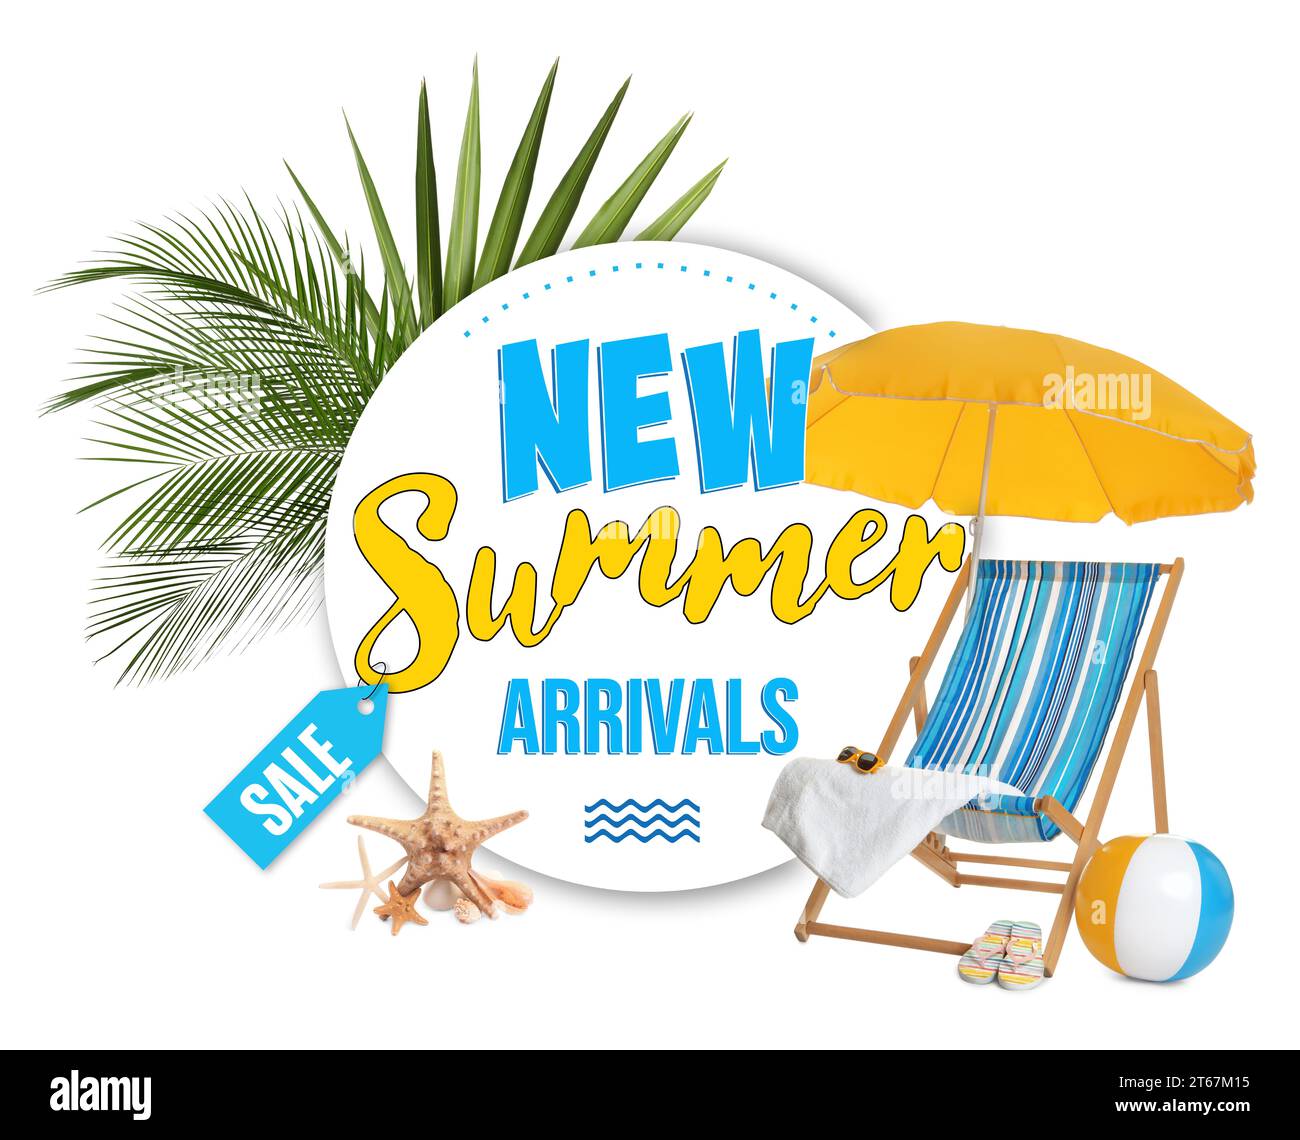 New summer arrivals flyer design. Deck chair, tropical leaves, different beach accessories and text on white background Stock Photo